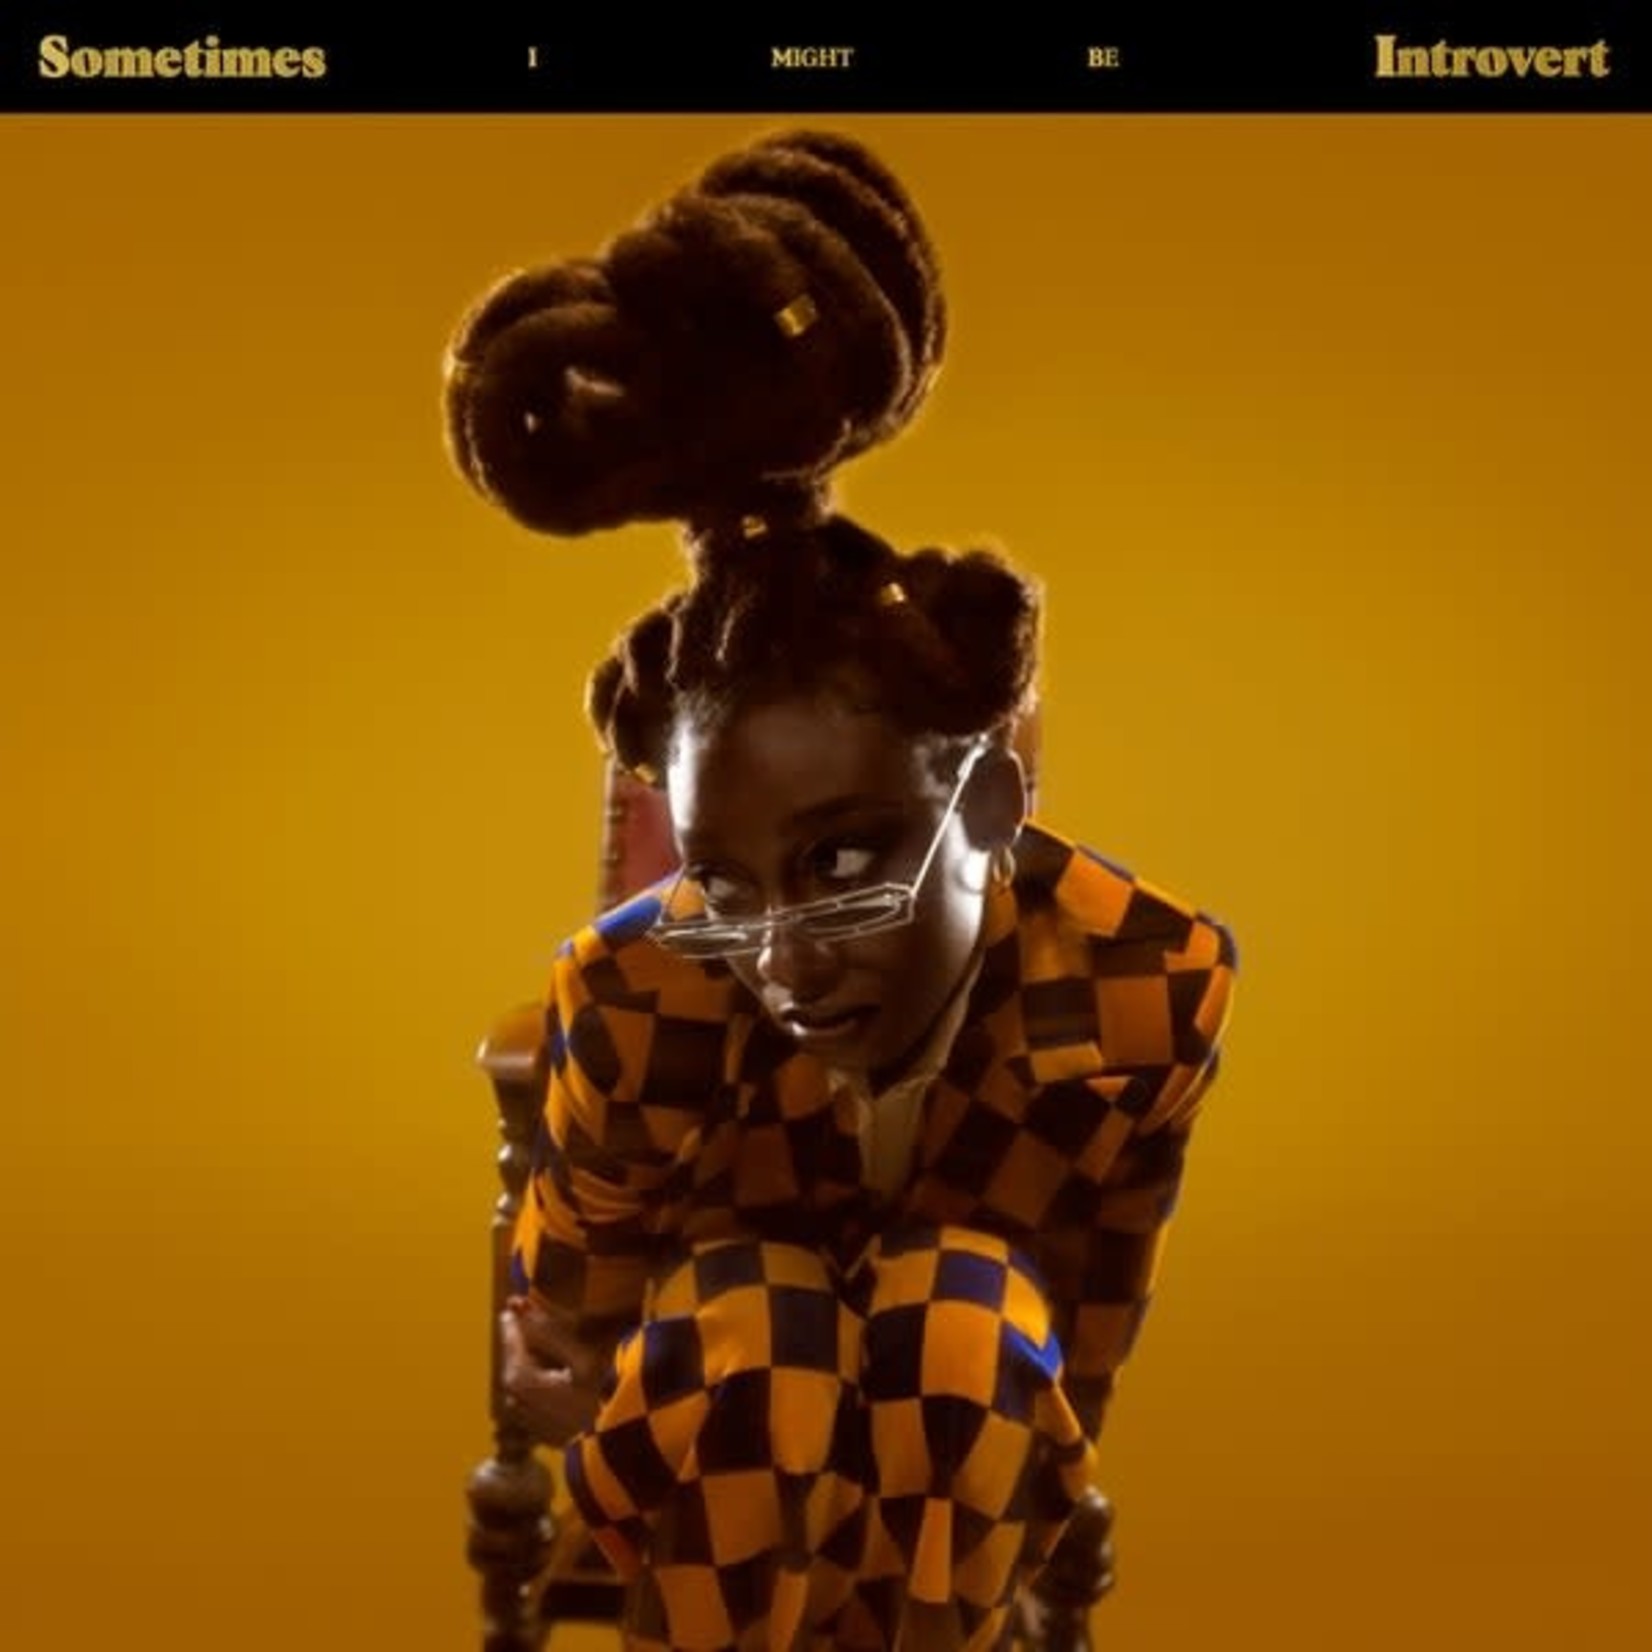 [New] Little Simz - Sometimes I Might Be Introvert